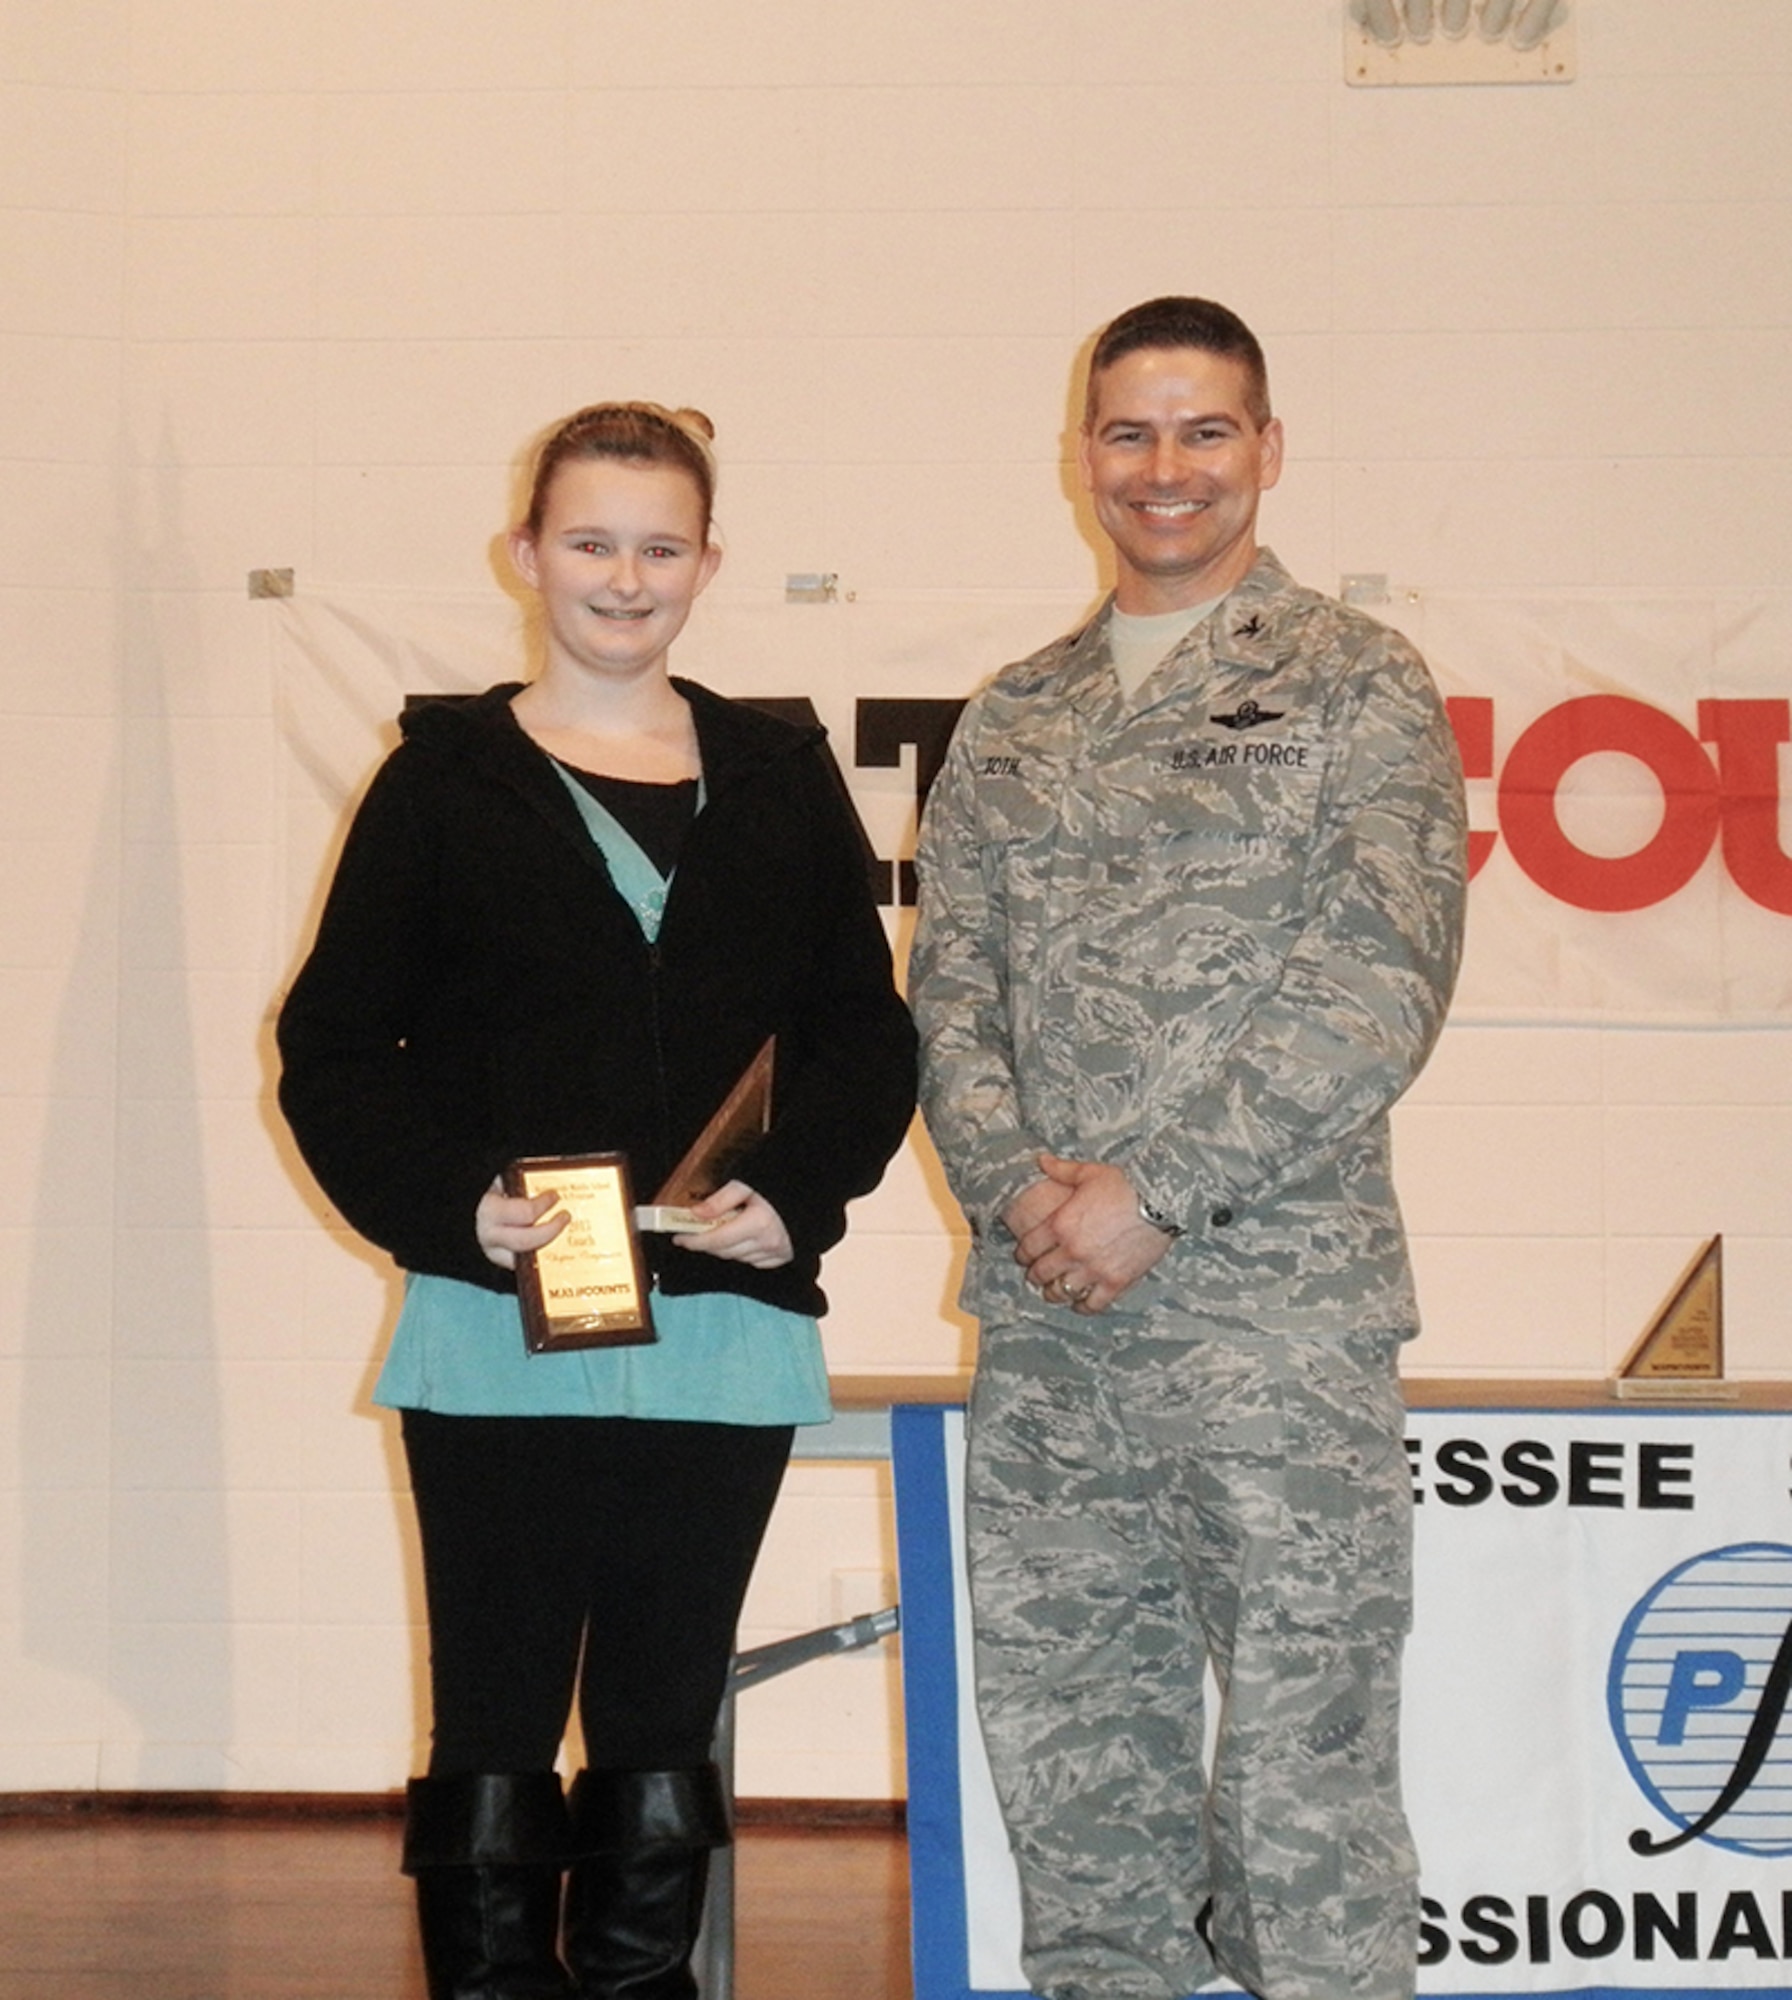 From left, Arnold Engineering Development Complex Commander, Col. Raymond Toth with West Middle School’s Kelsi Burt, second place individual winner. (Photo provided)